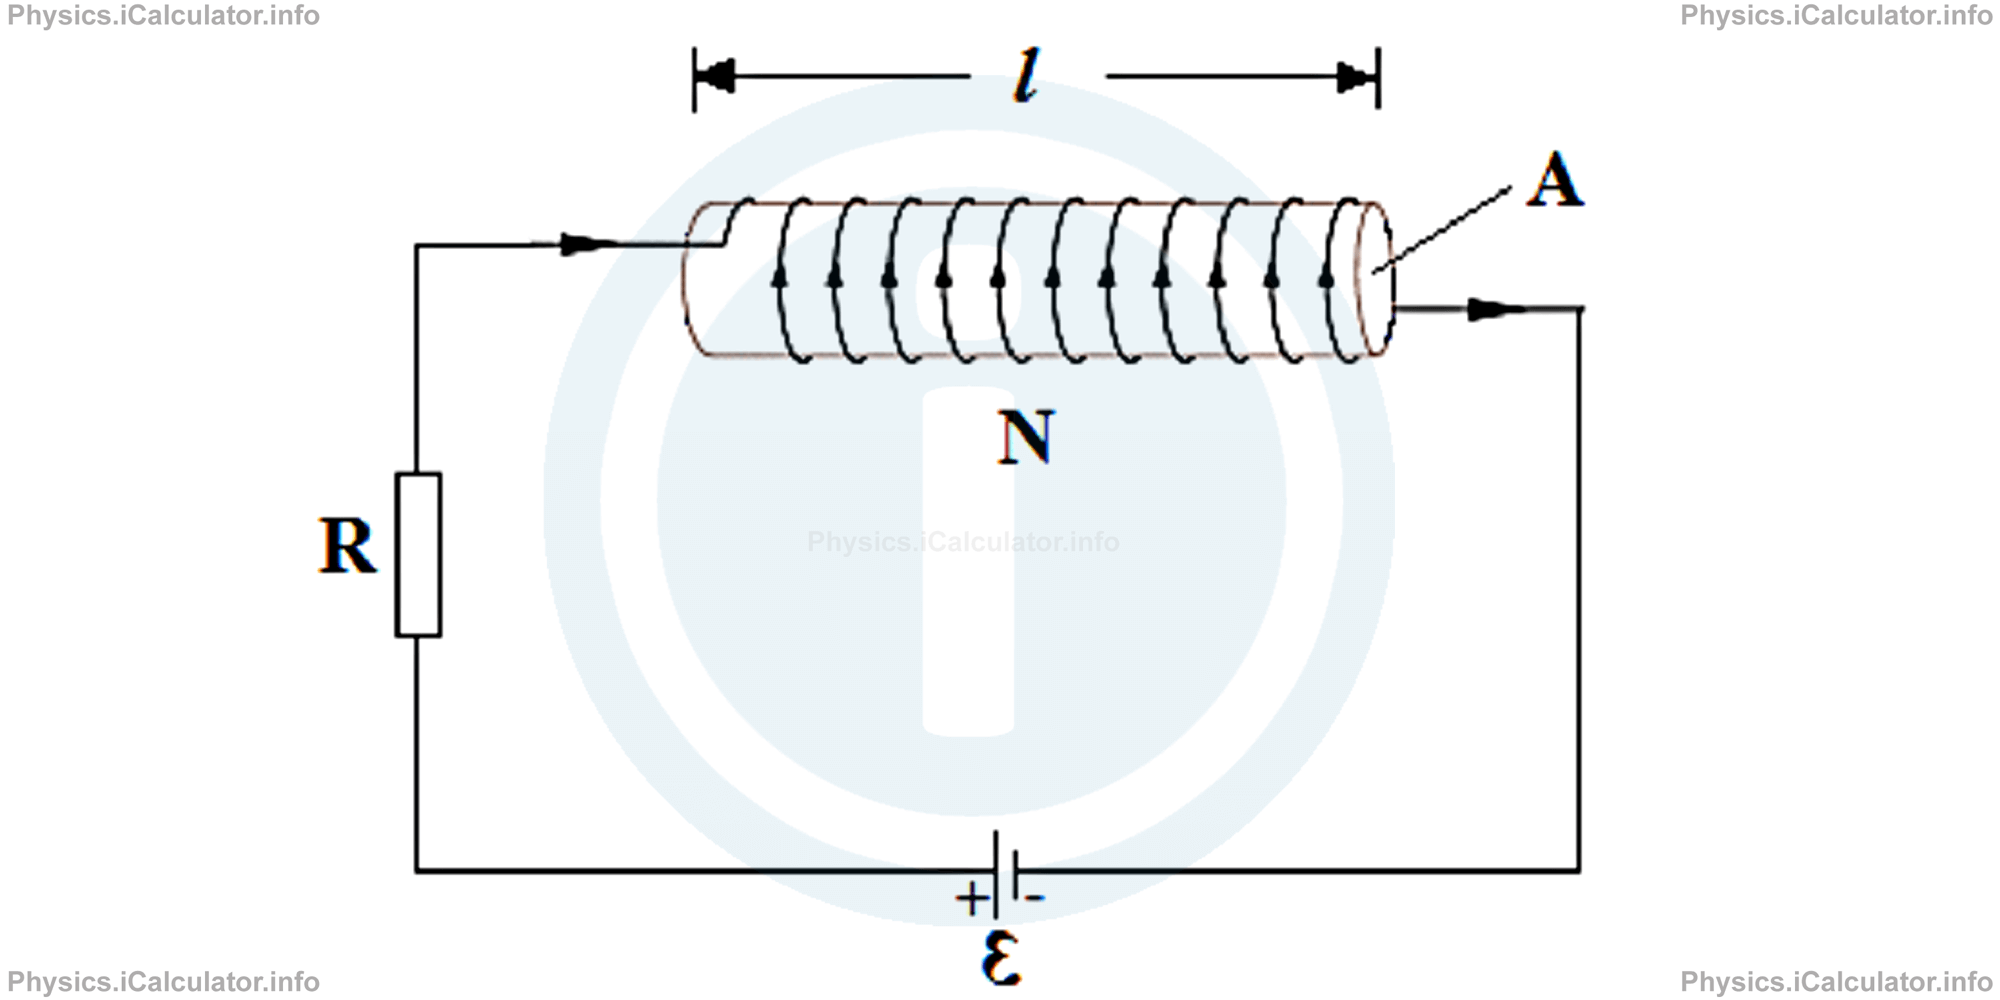 Physics Tutorials: This image provides visual information for the physics tutorial Inductance and Self-Induction 